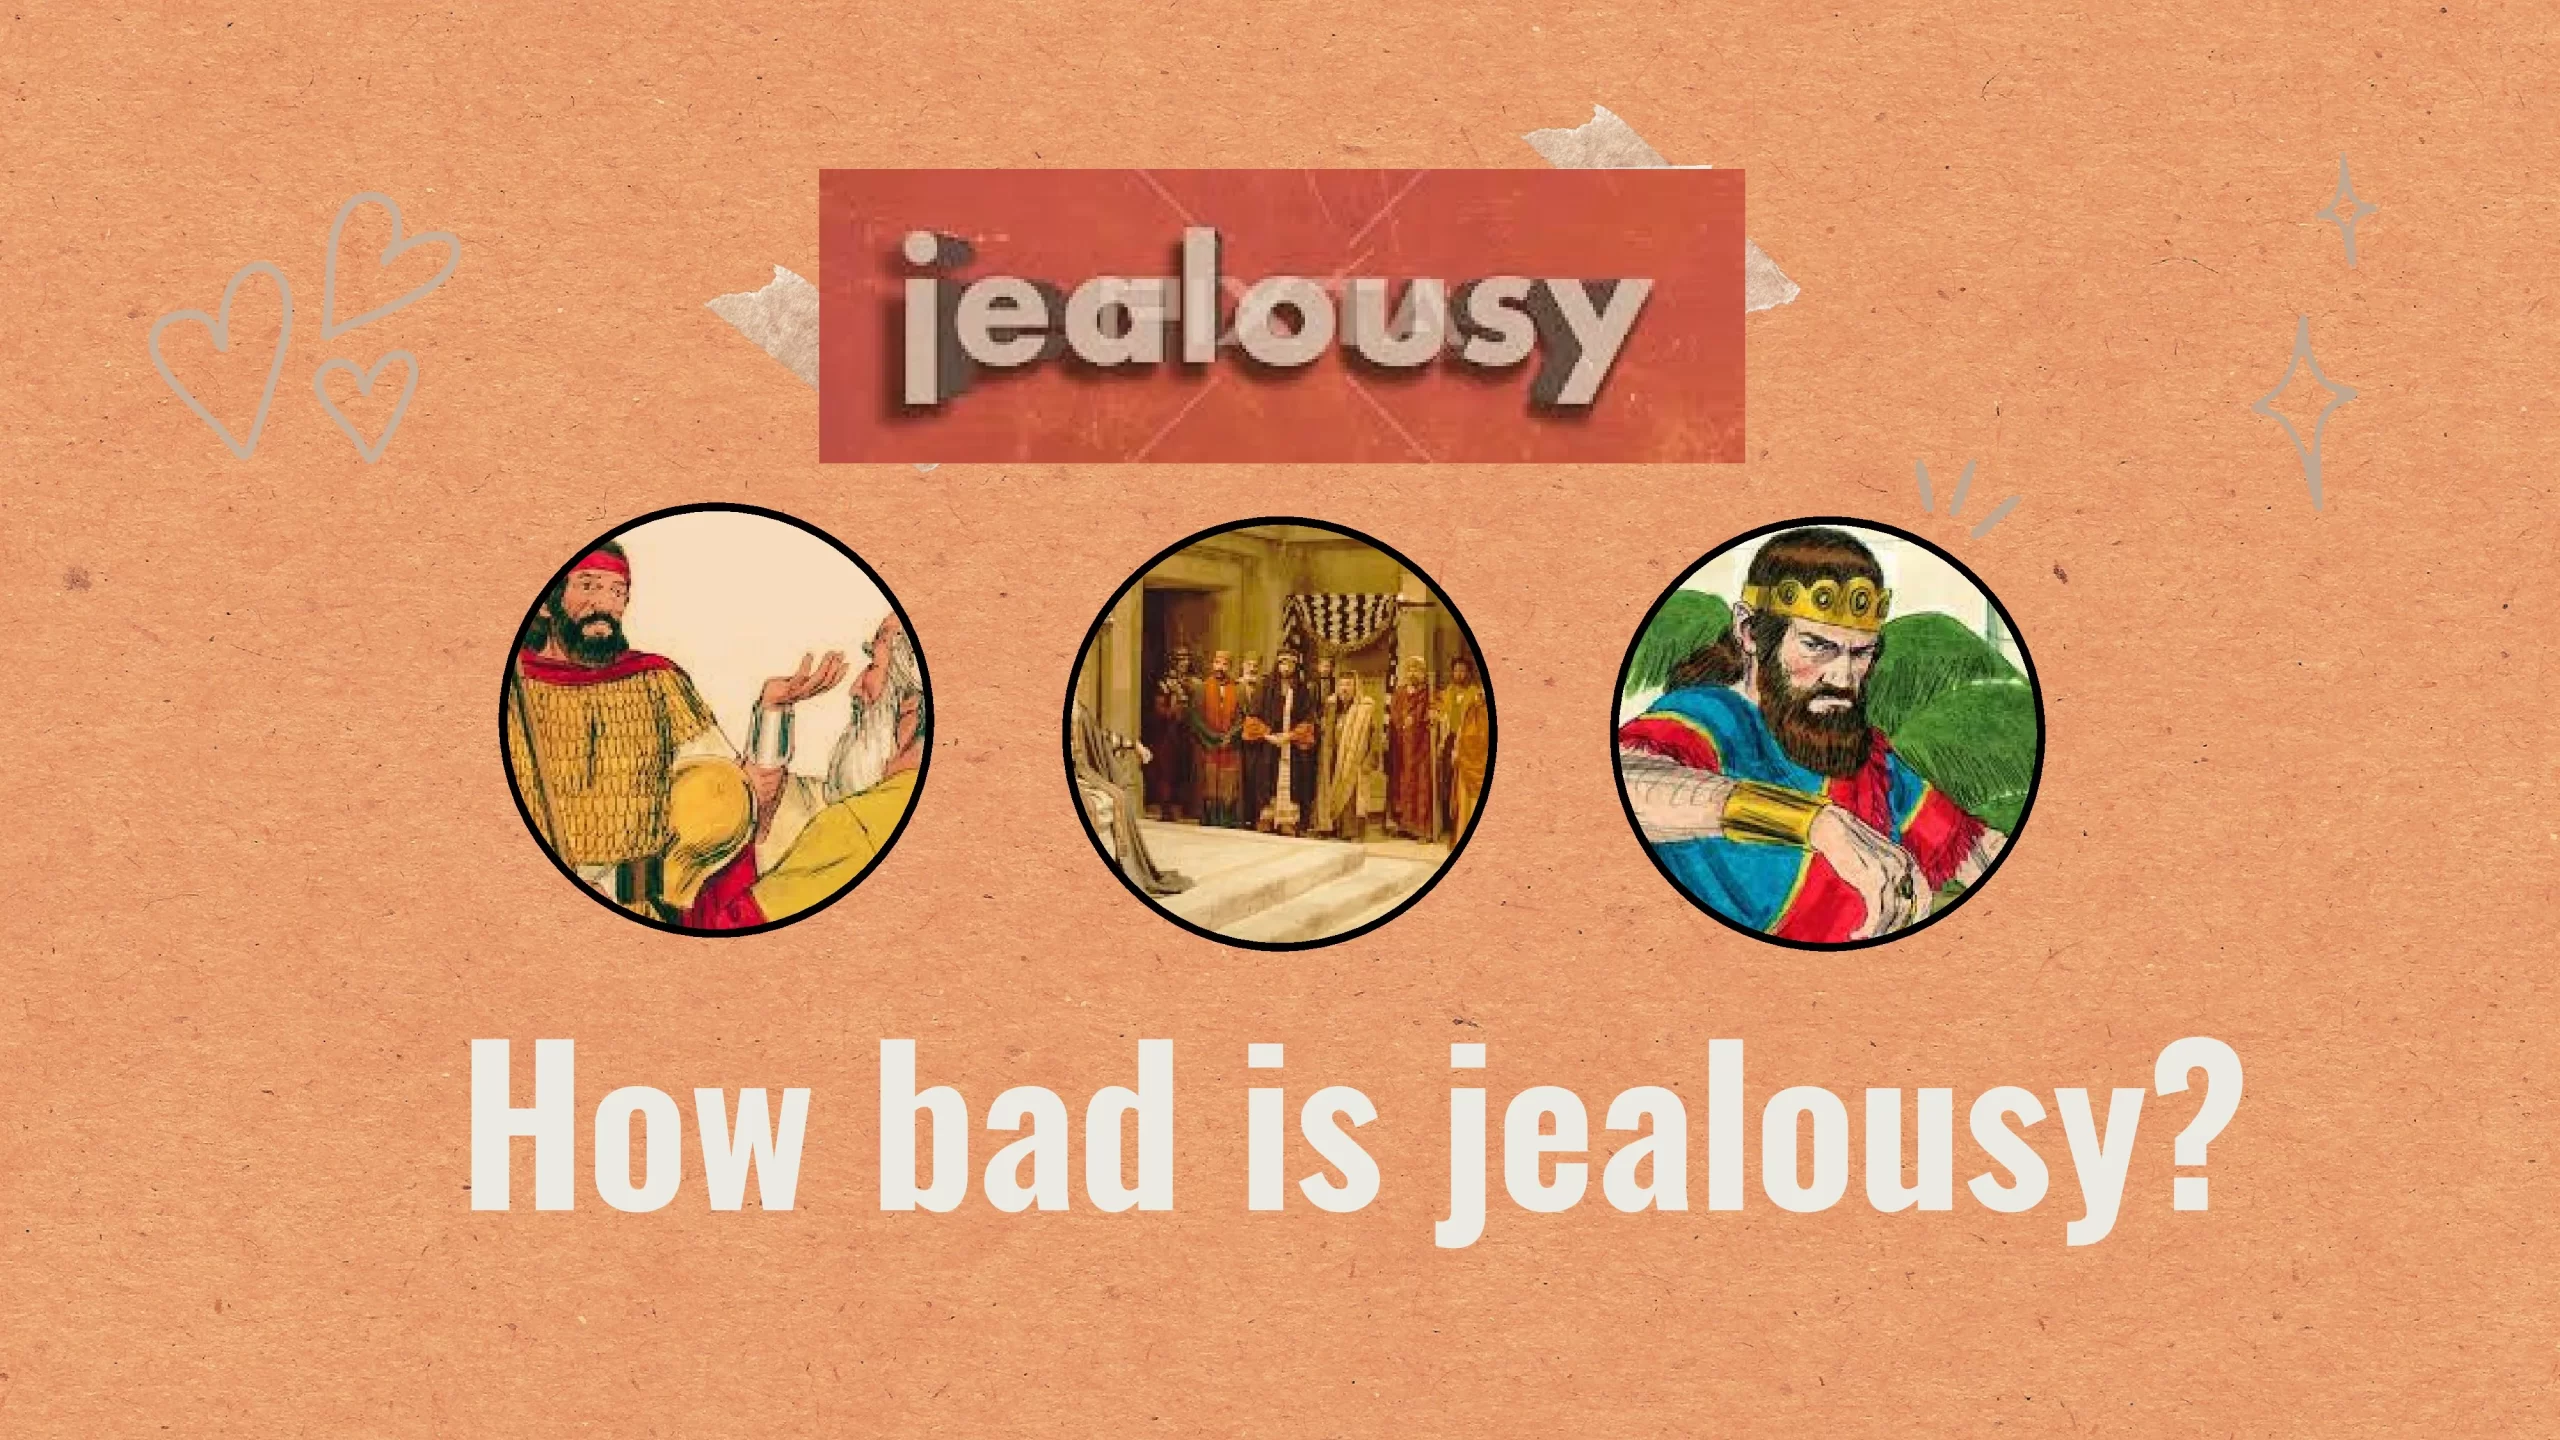 What are signs and behaviors of jealousy people?